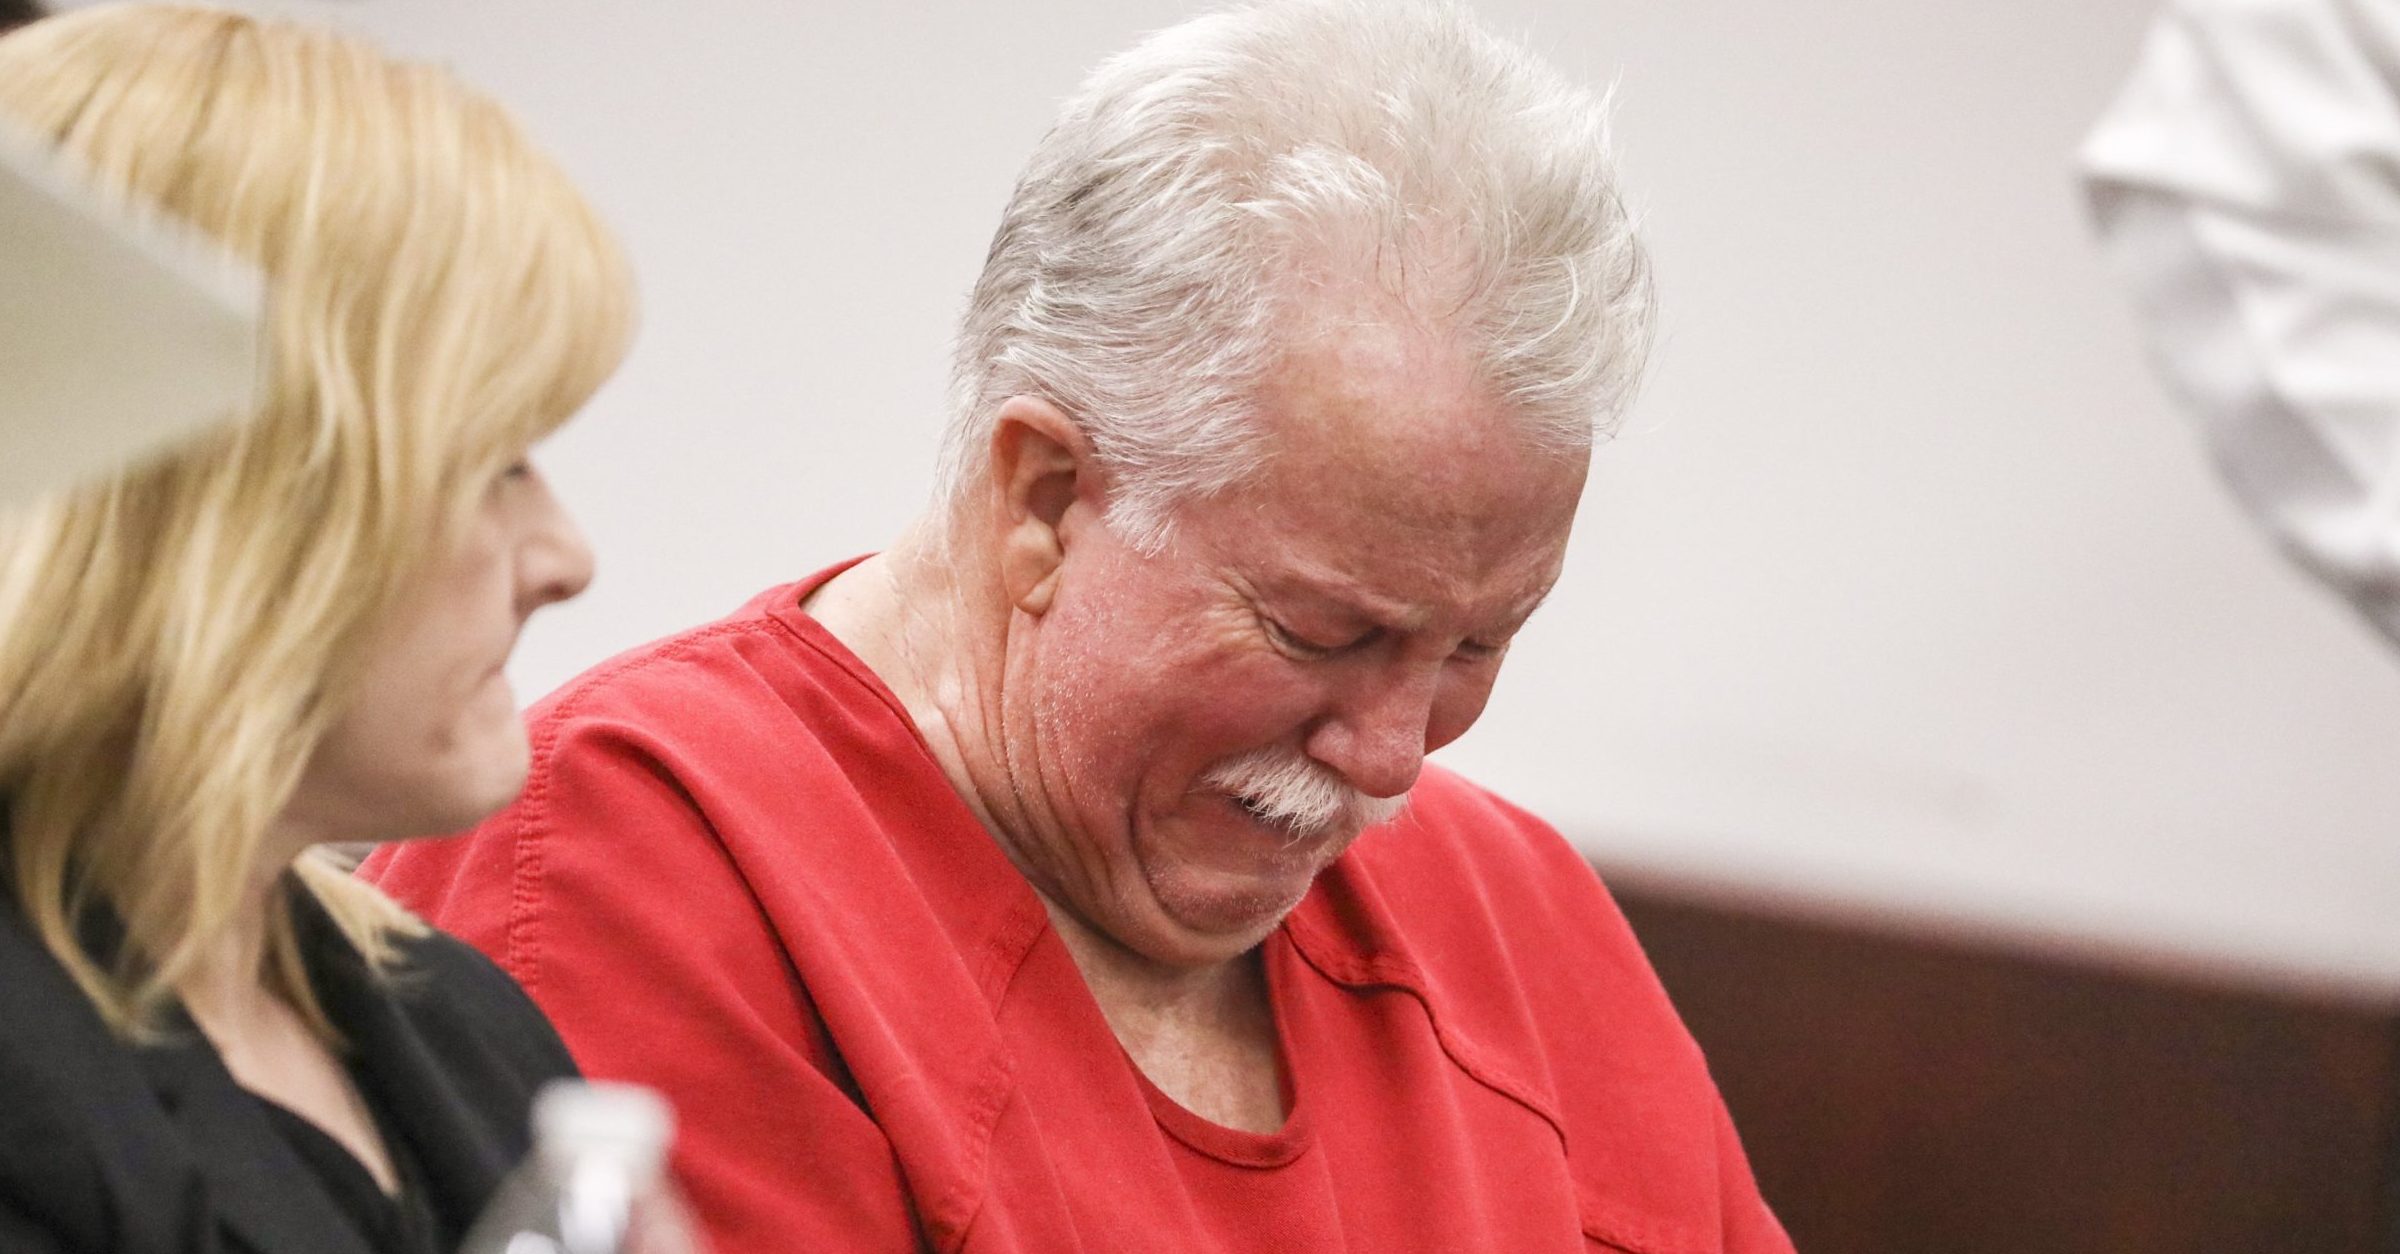 Judge speaks to murder suspect who evaded capture for 40 years.